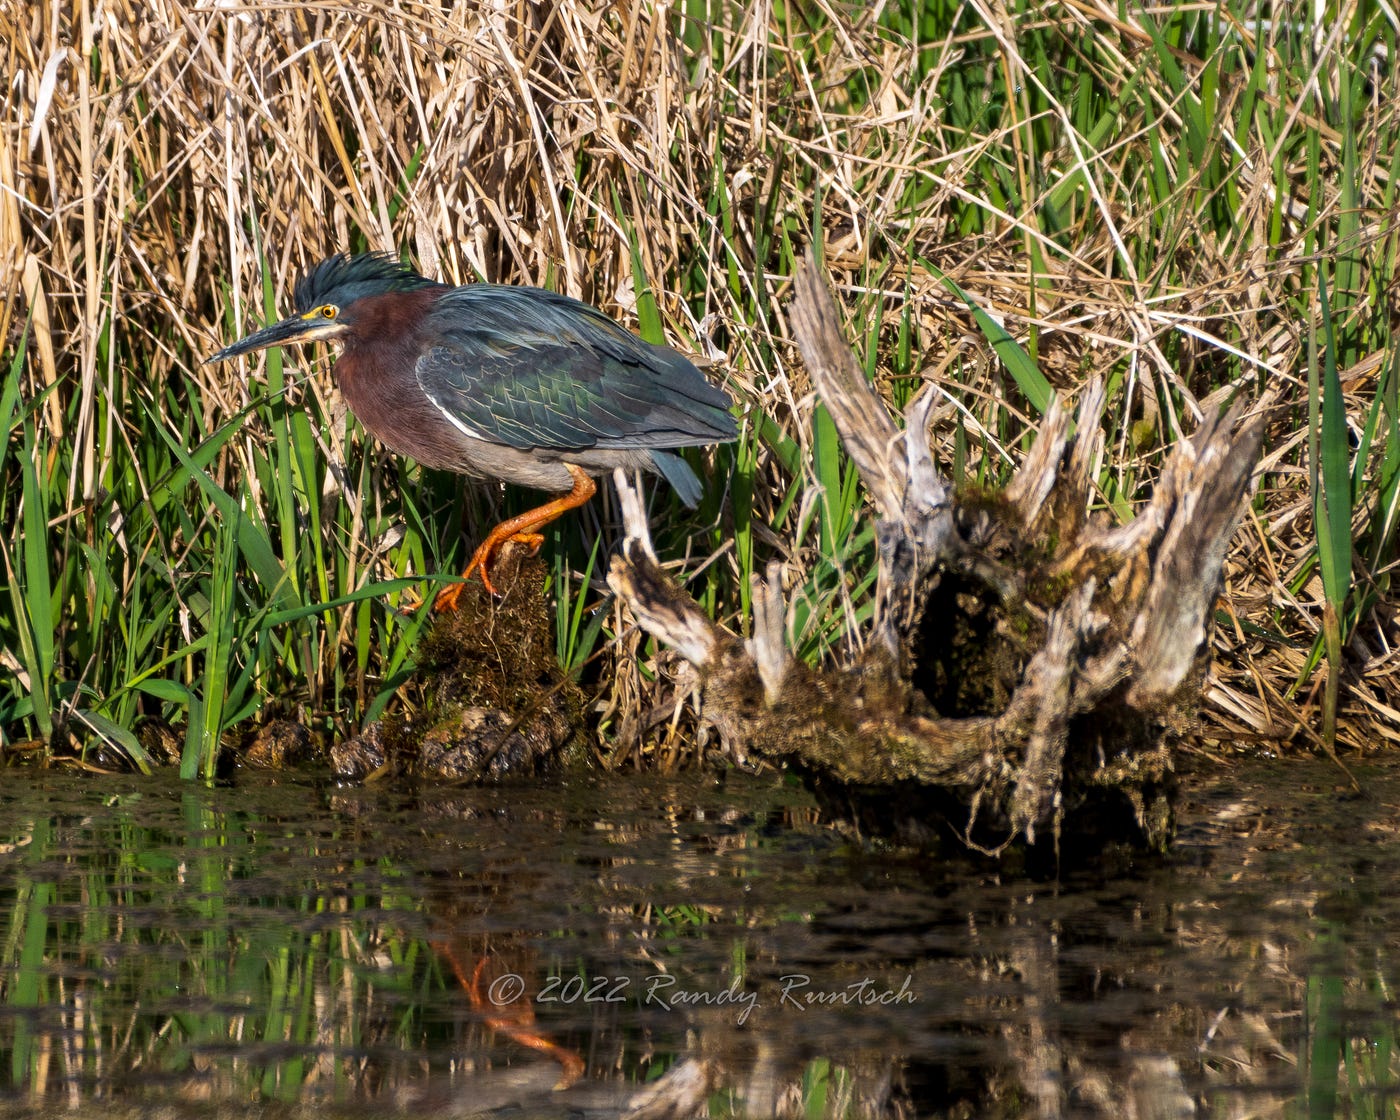 Green Heron perched on a stump.